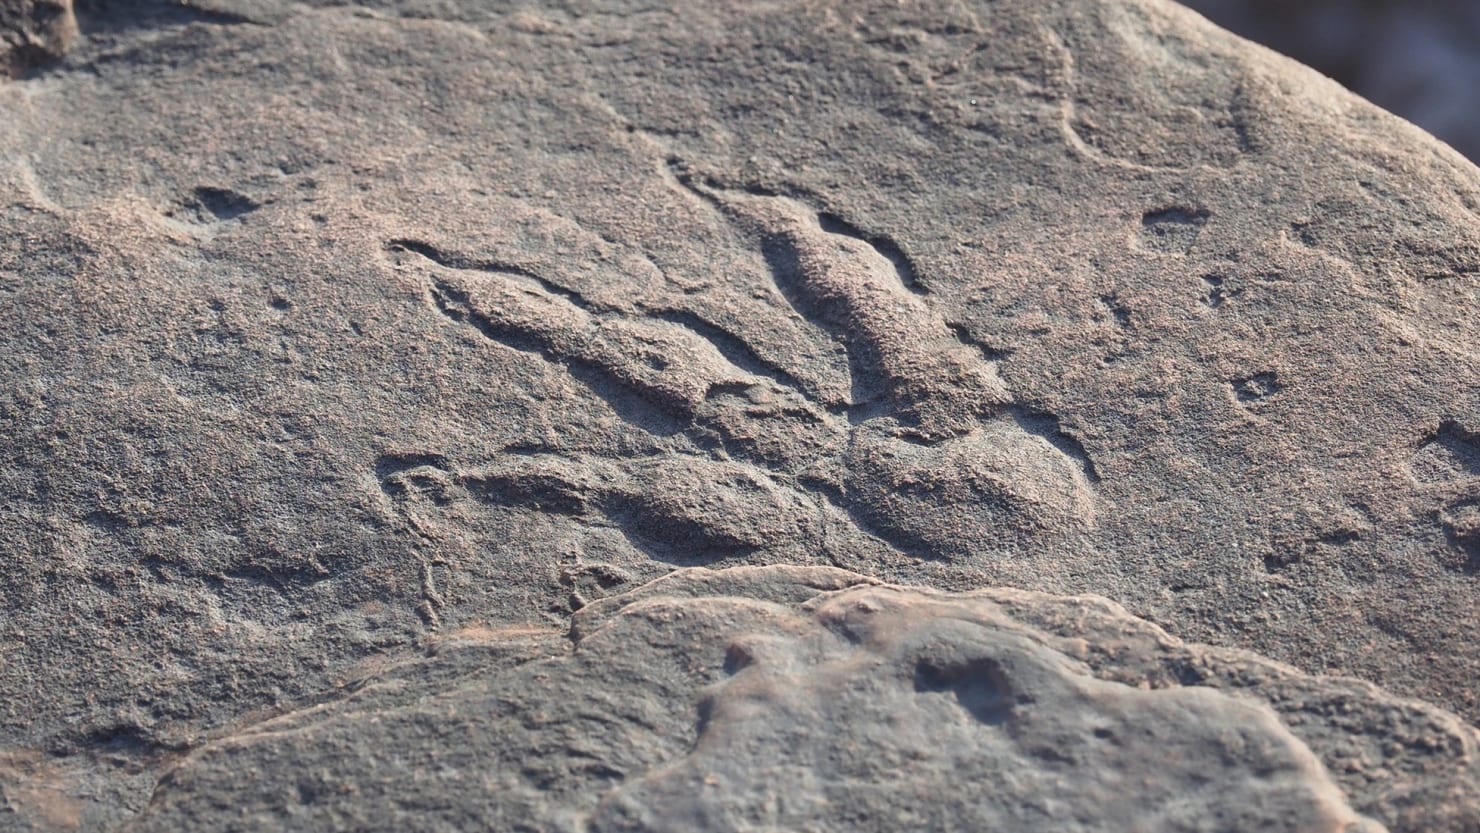 4-year-old child discovers 220 million-year-old dinosaur footprint in Wales